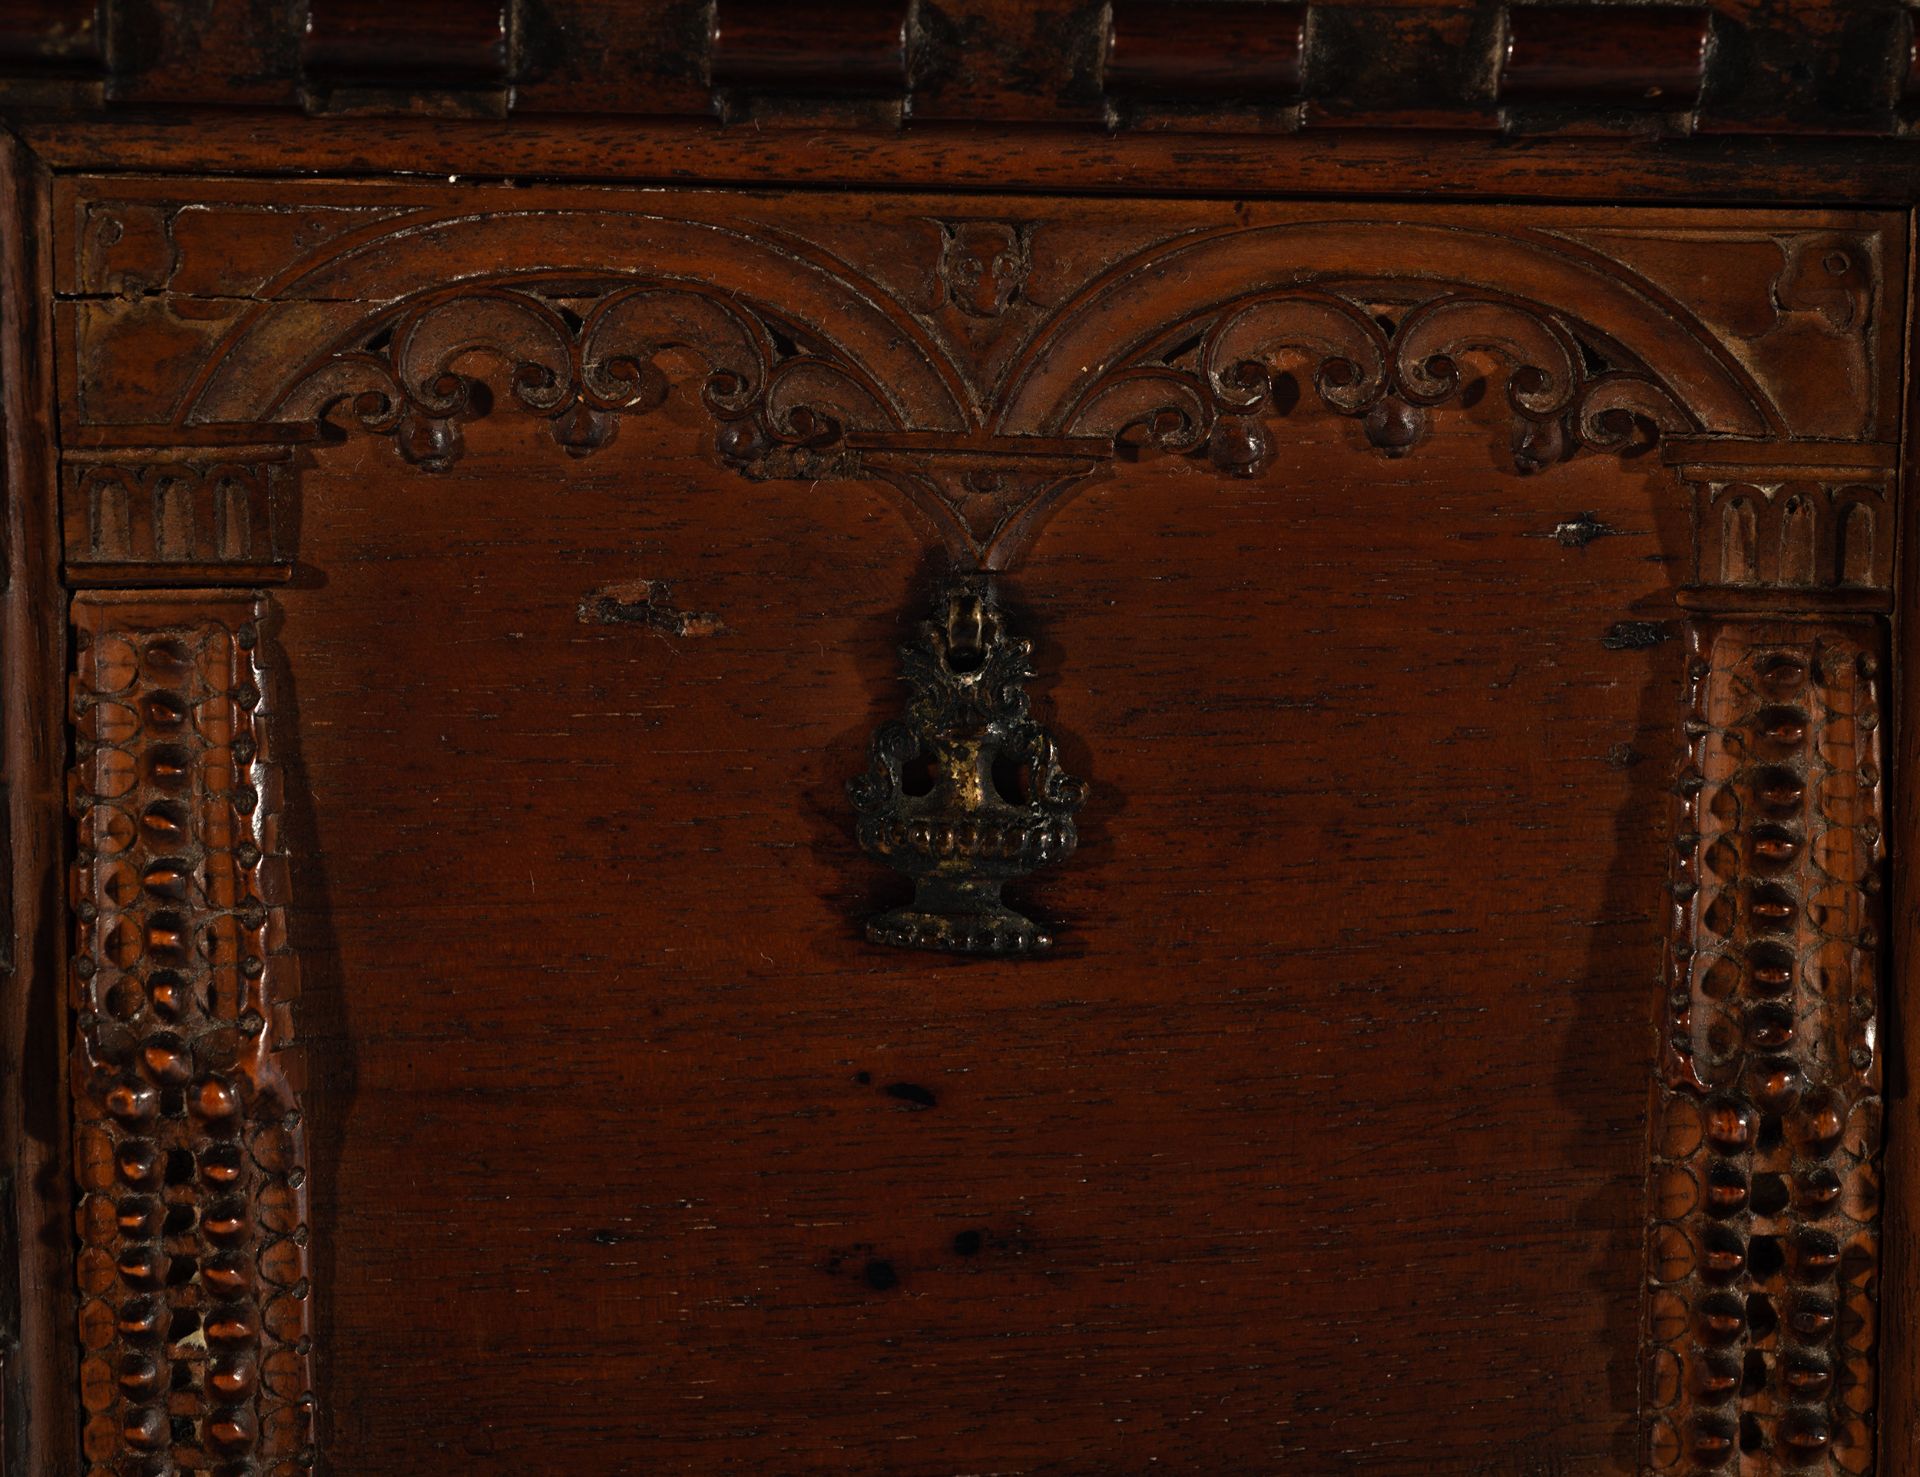 Exceptional plateresque chest in fruit wood, boxwood and marquetry, Spanish Renaissance, mid-16th ce - Image 8 of 13